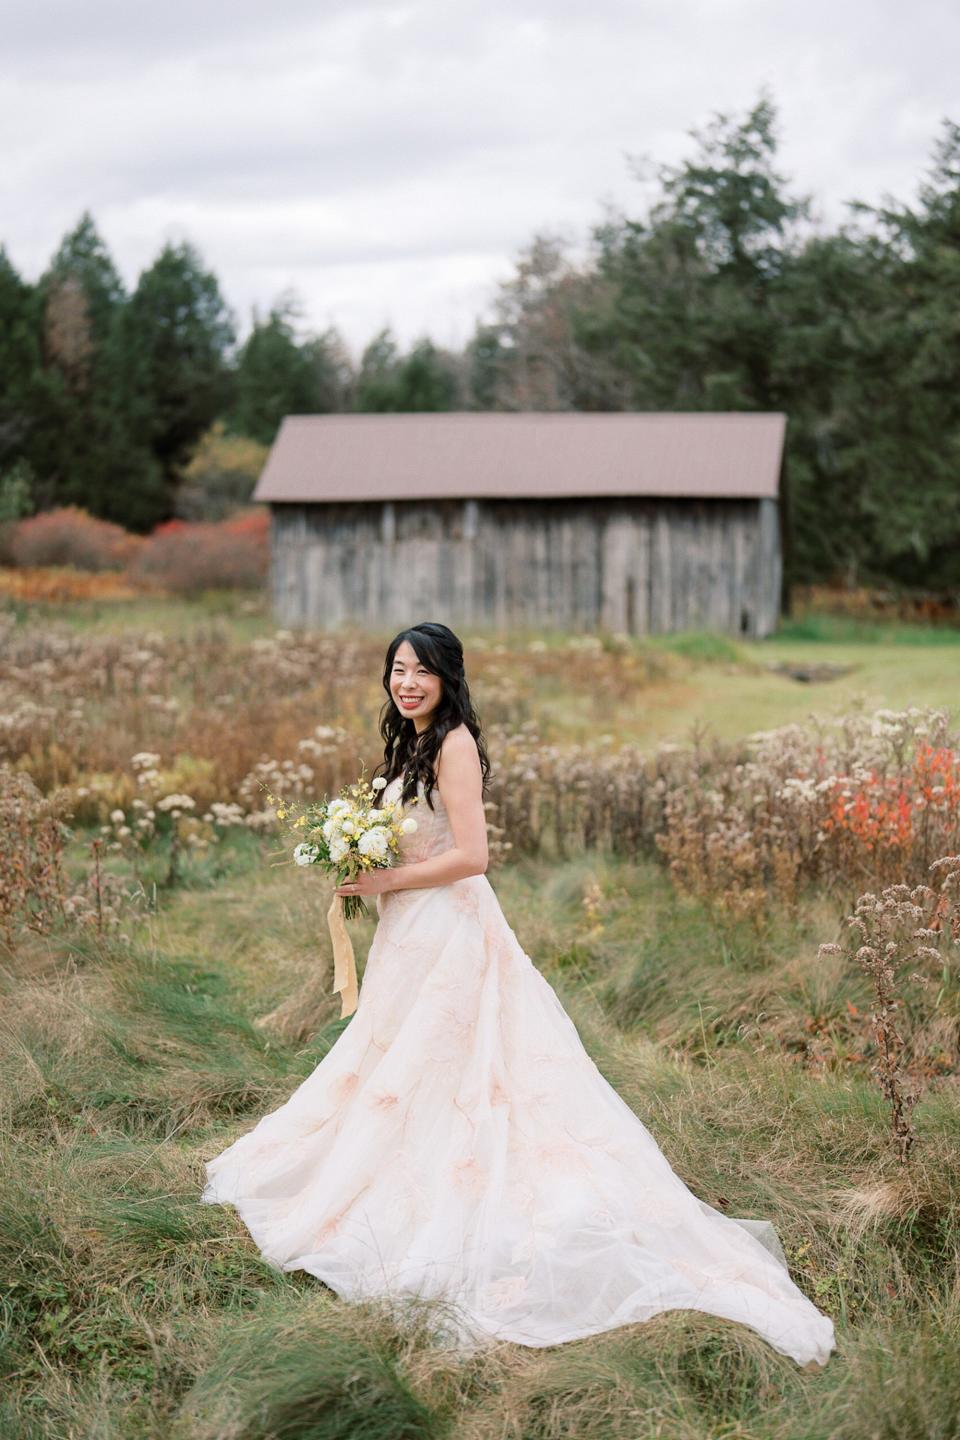 A bride stands in a field wearing a floral-patterned wedding dress.